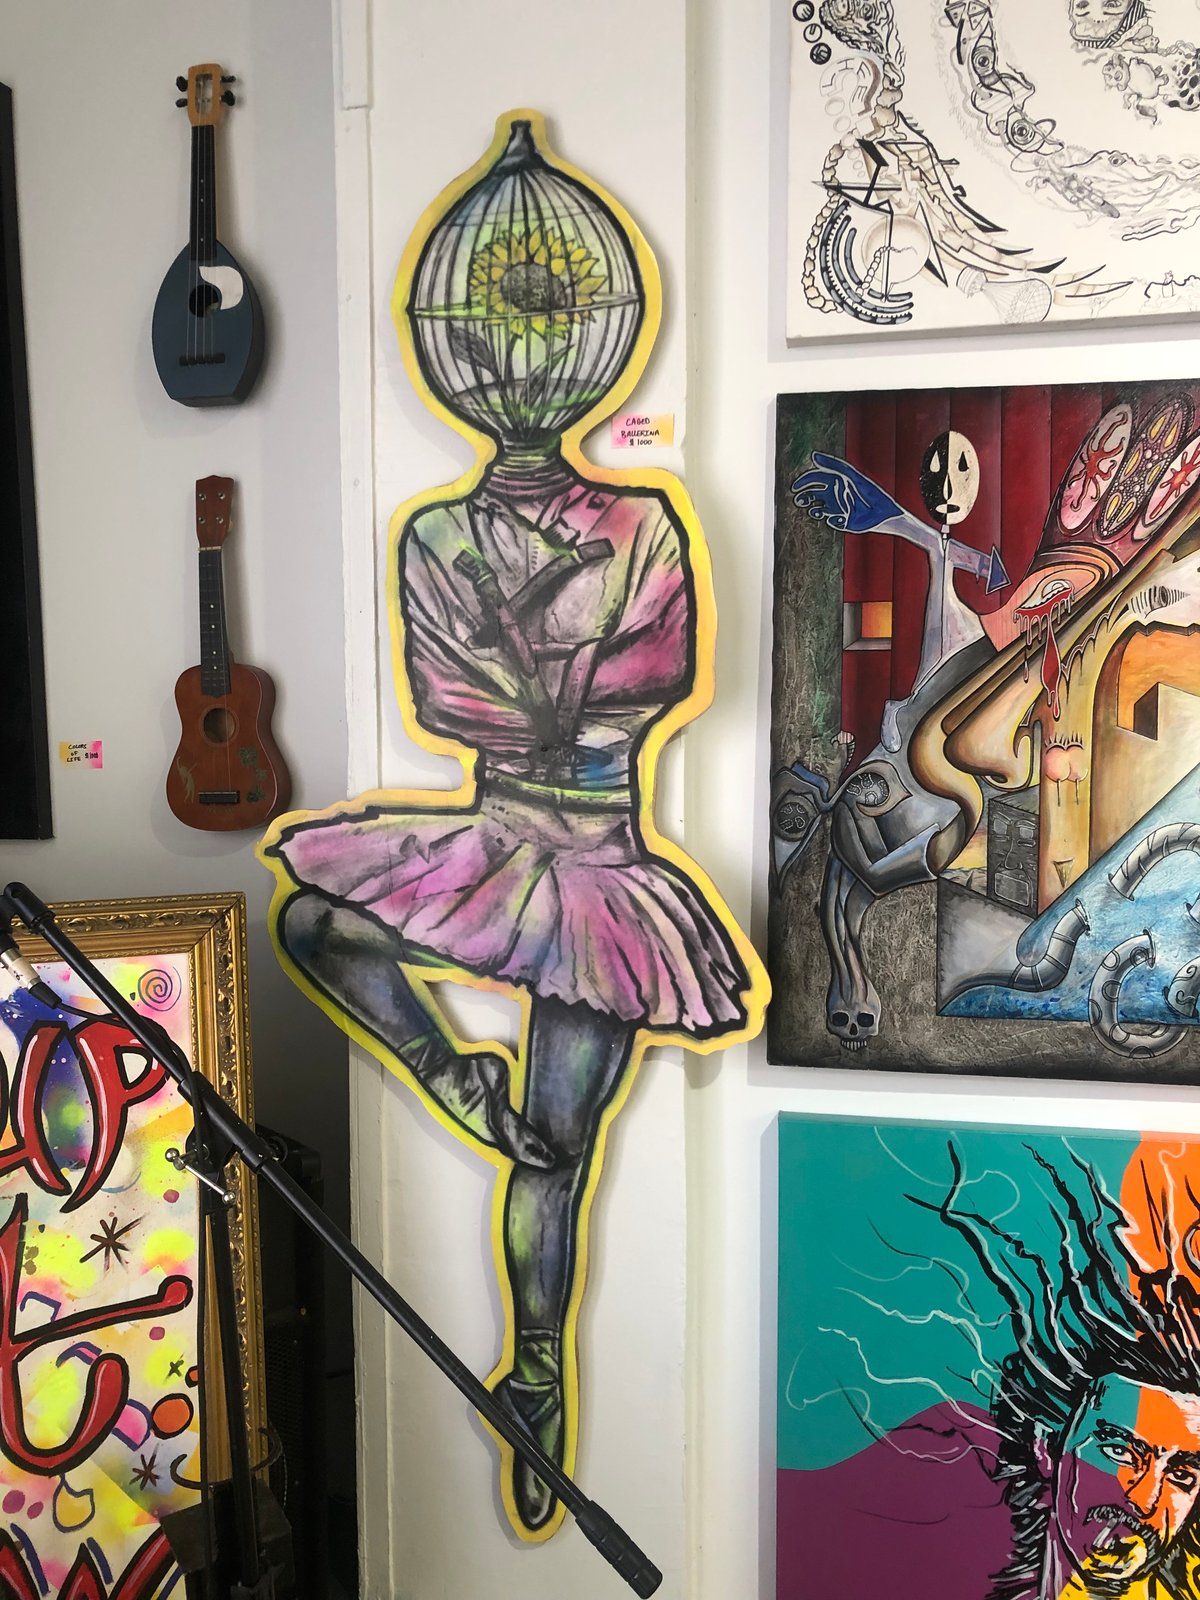 Caged Ballerina Cut out 